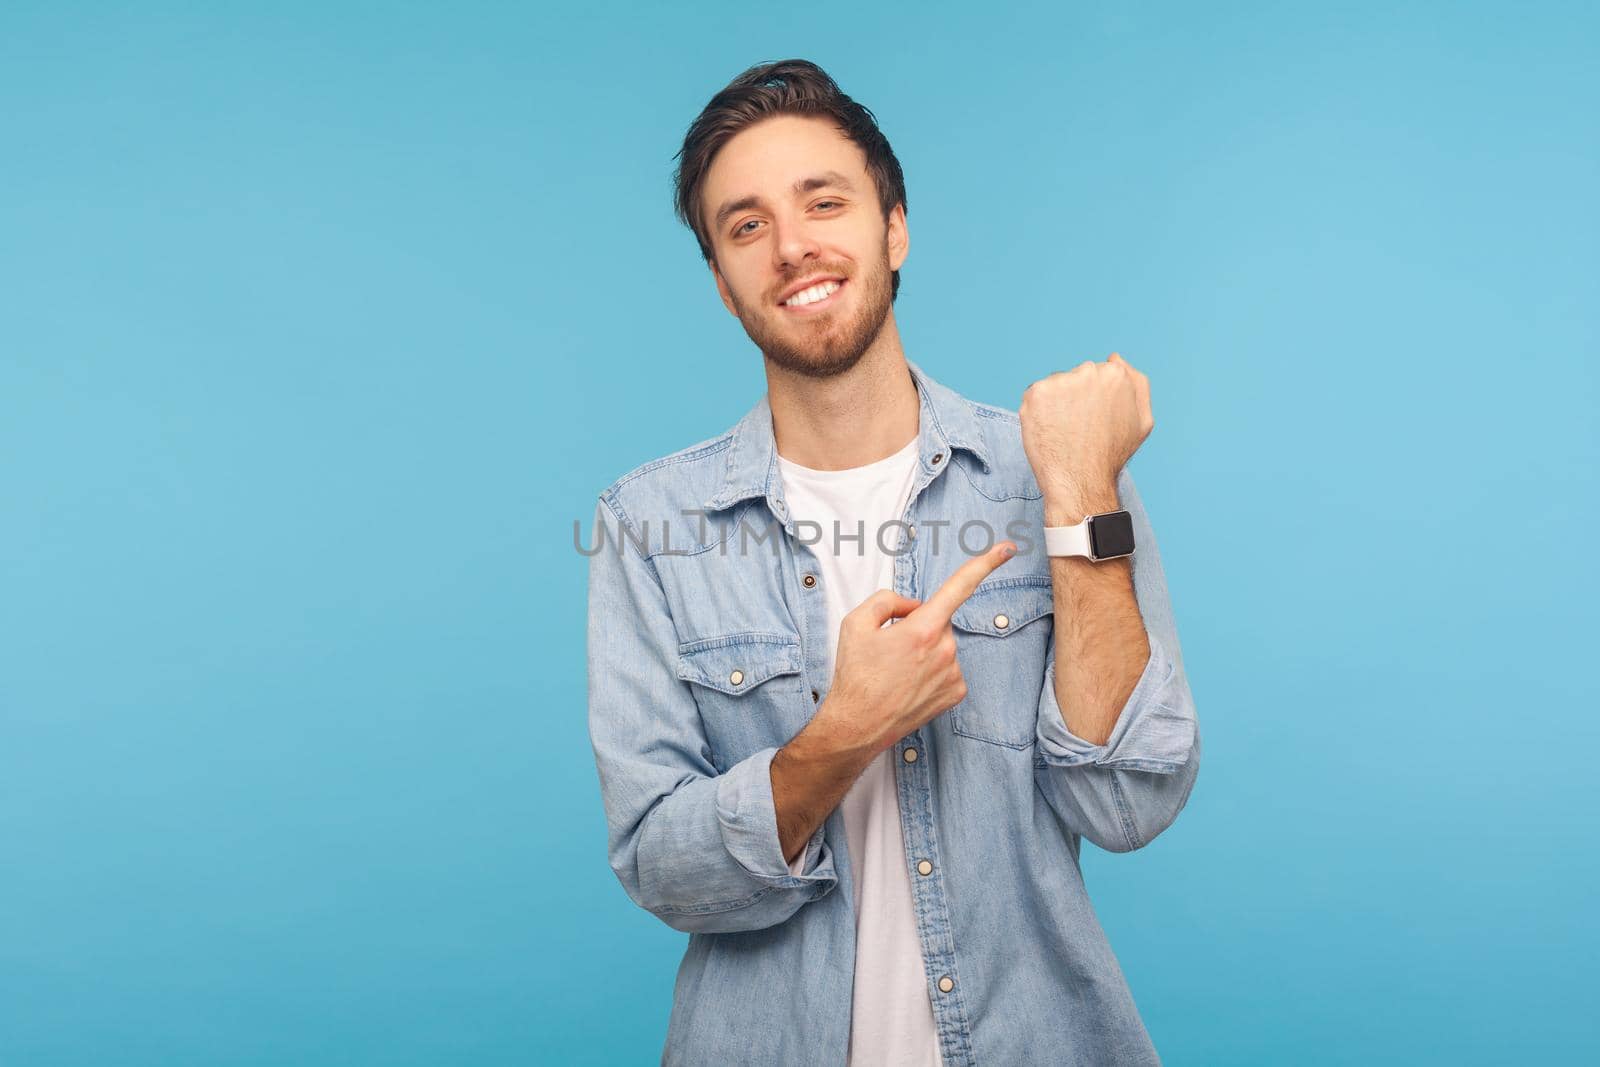 Please, hurry up. Portrait of cheerful punctual man in worker denim shirt pointing at wrist watch and smiling, showing smartwatch devise with mock up display. indoor isolated on blue background